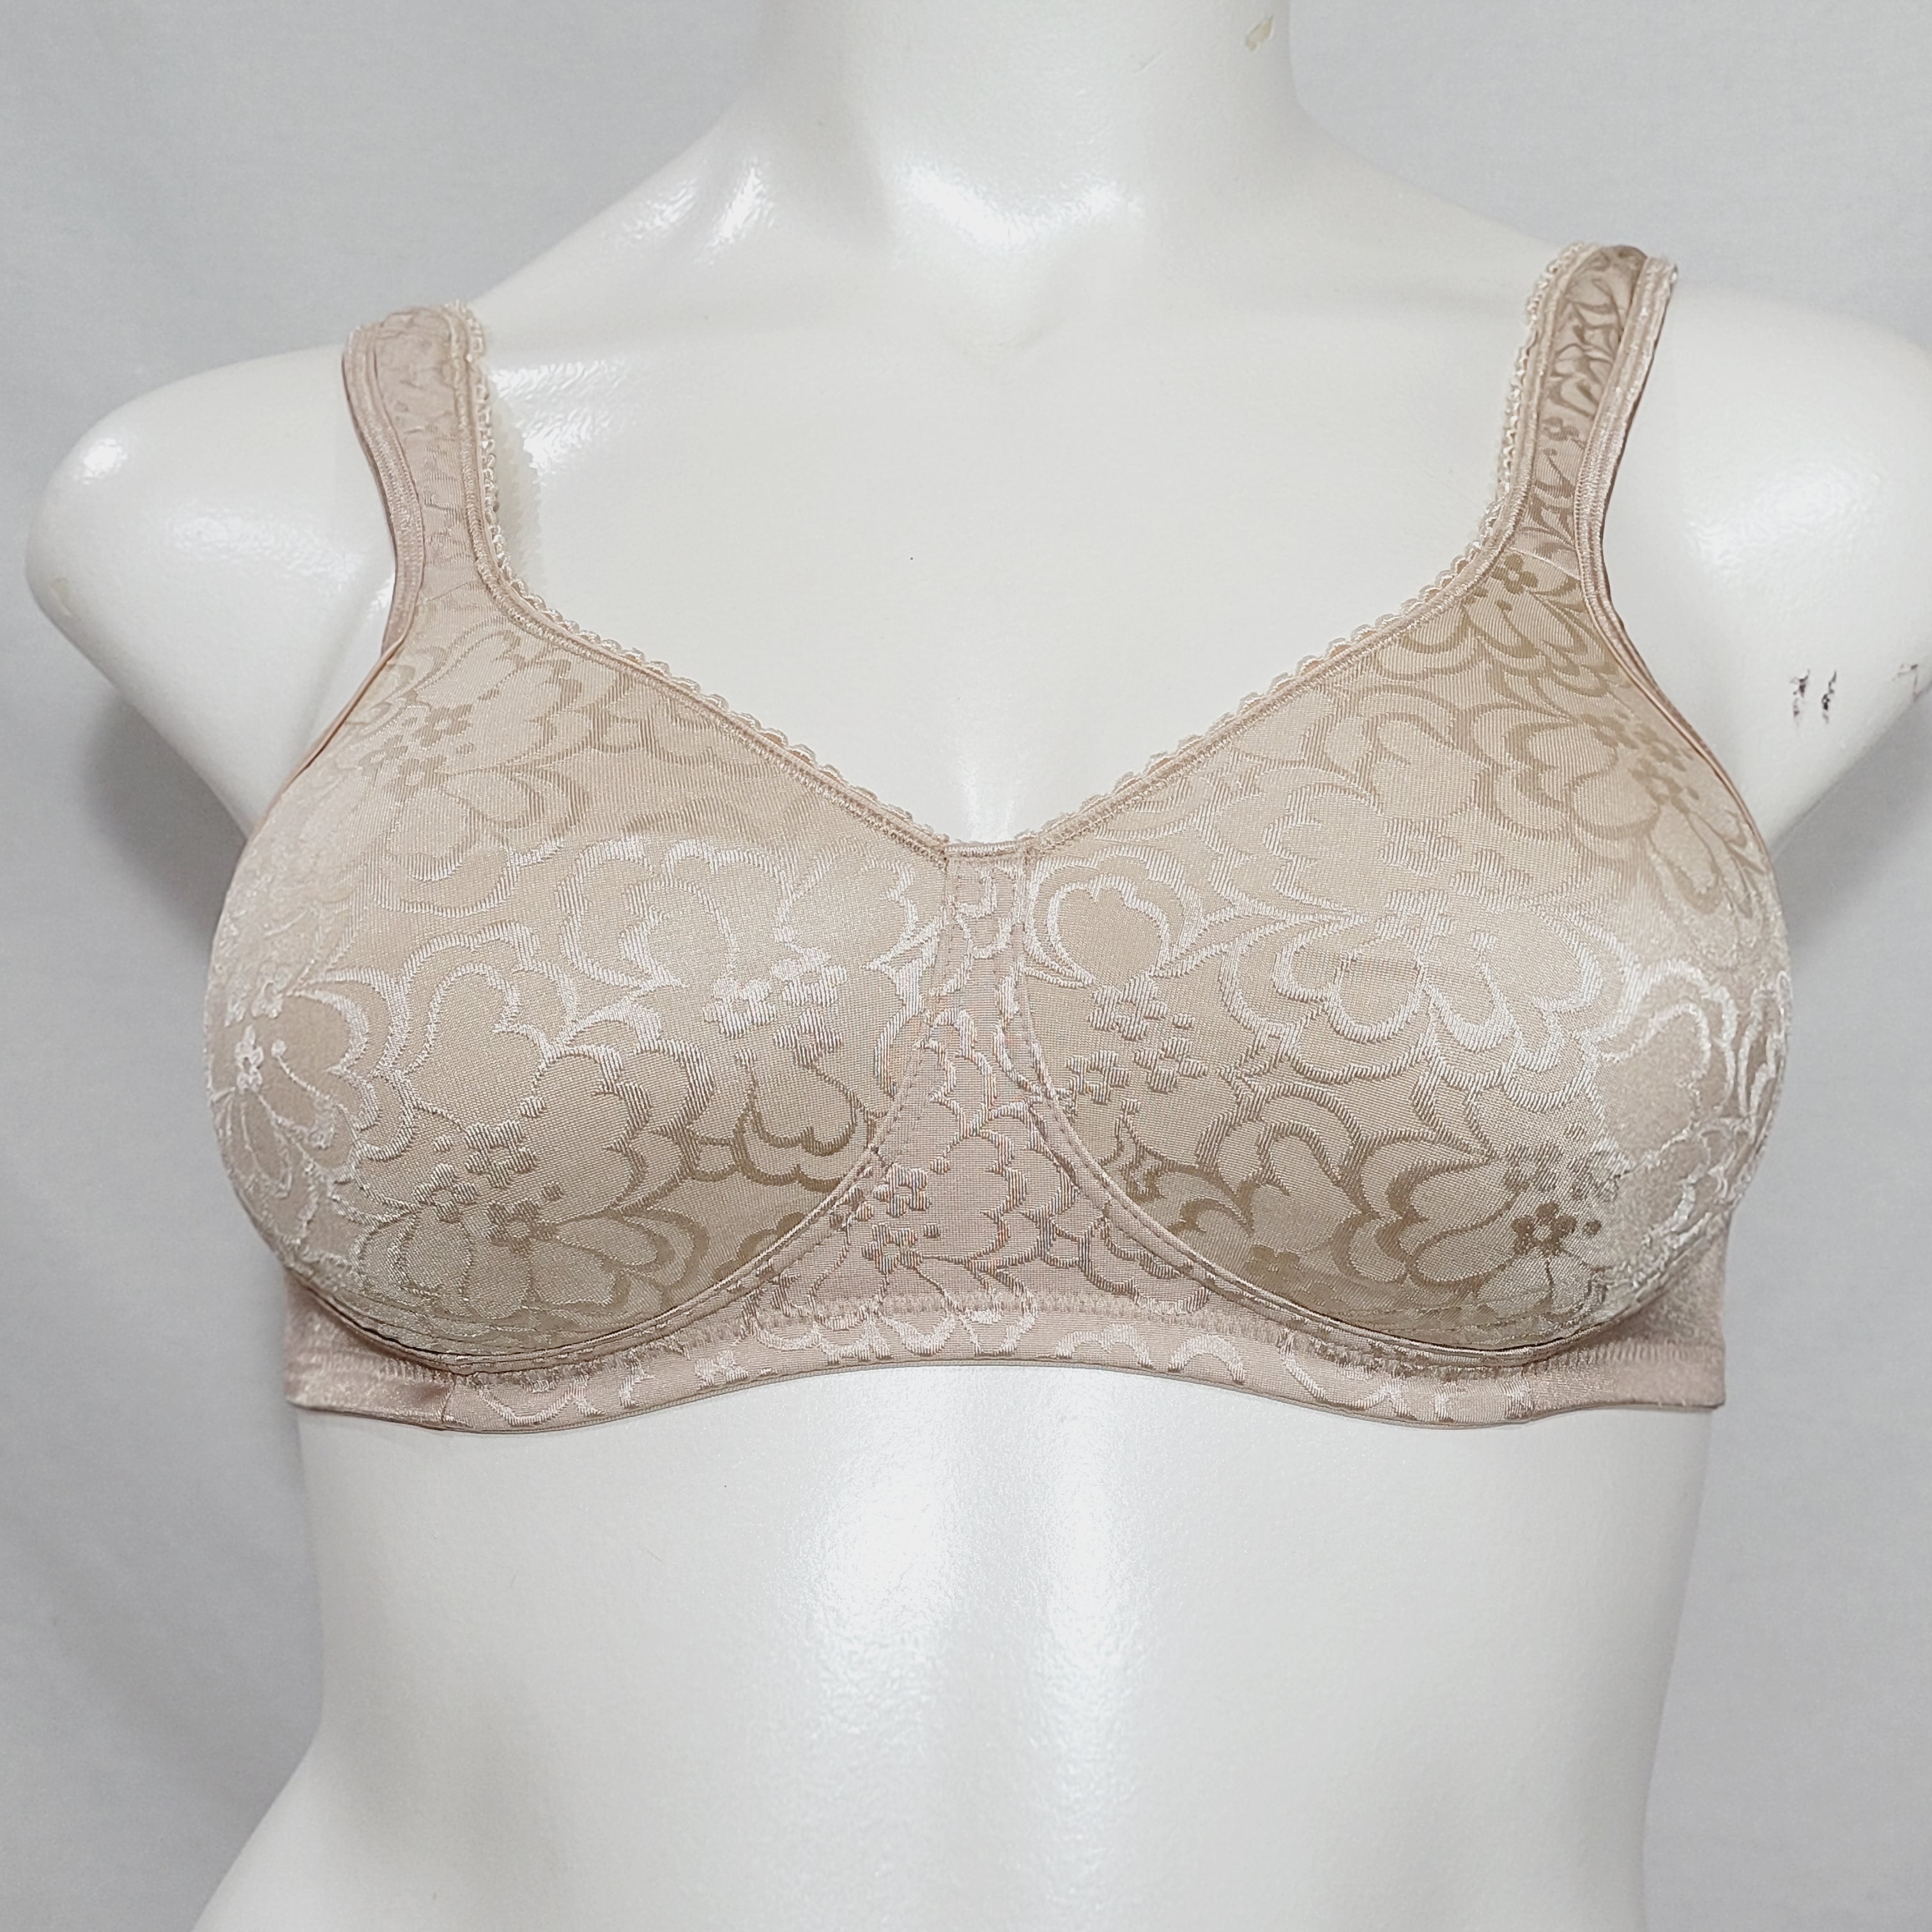 LEADING LADY Nude Smooth Wire-Free Bra, Size 42A, NWOT 